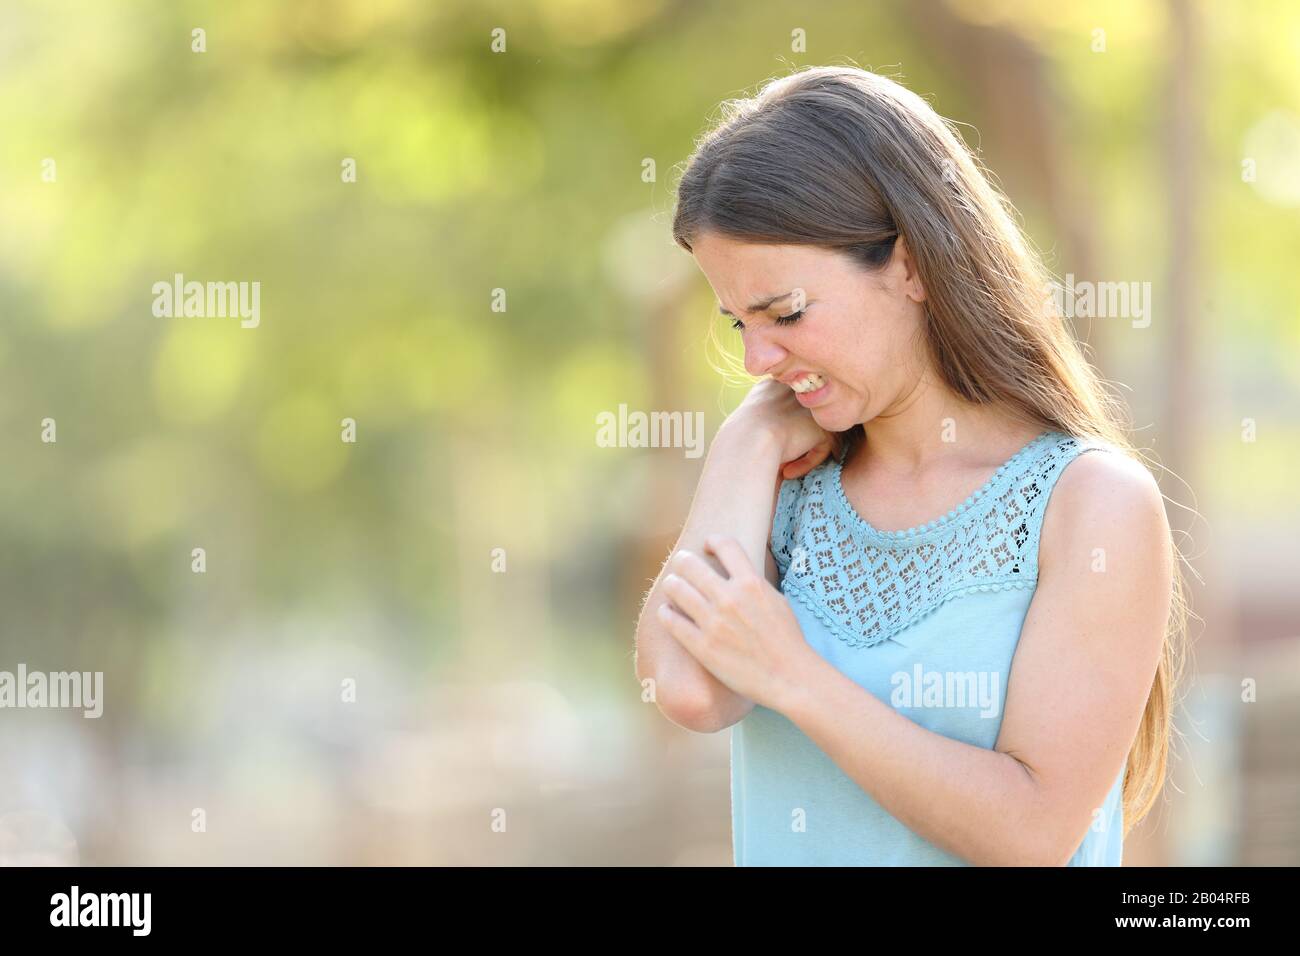 Overwhelmed woman scratching because her arm itches standing in a park in summer season Stock Photo